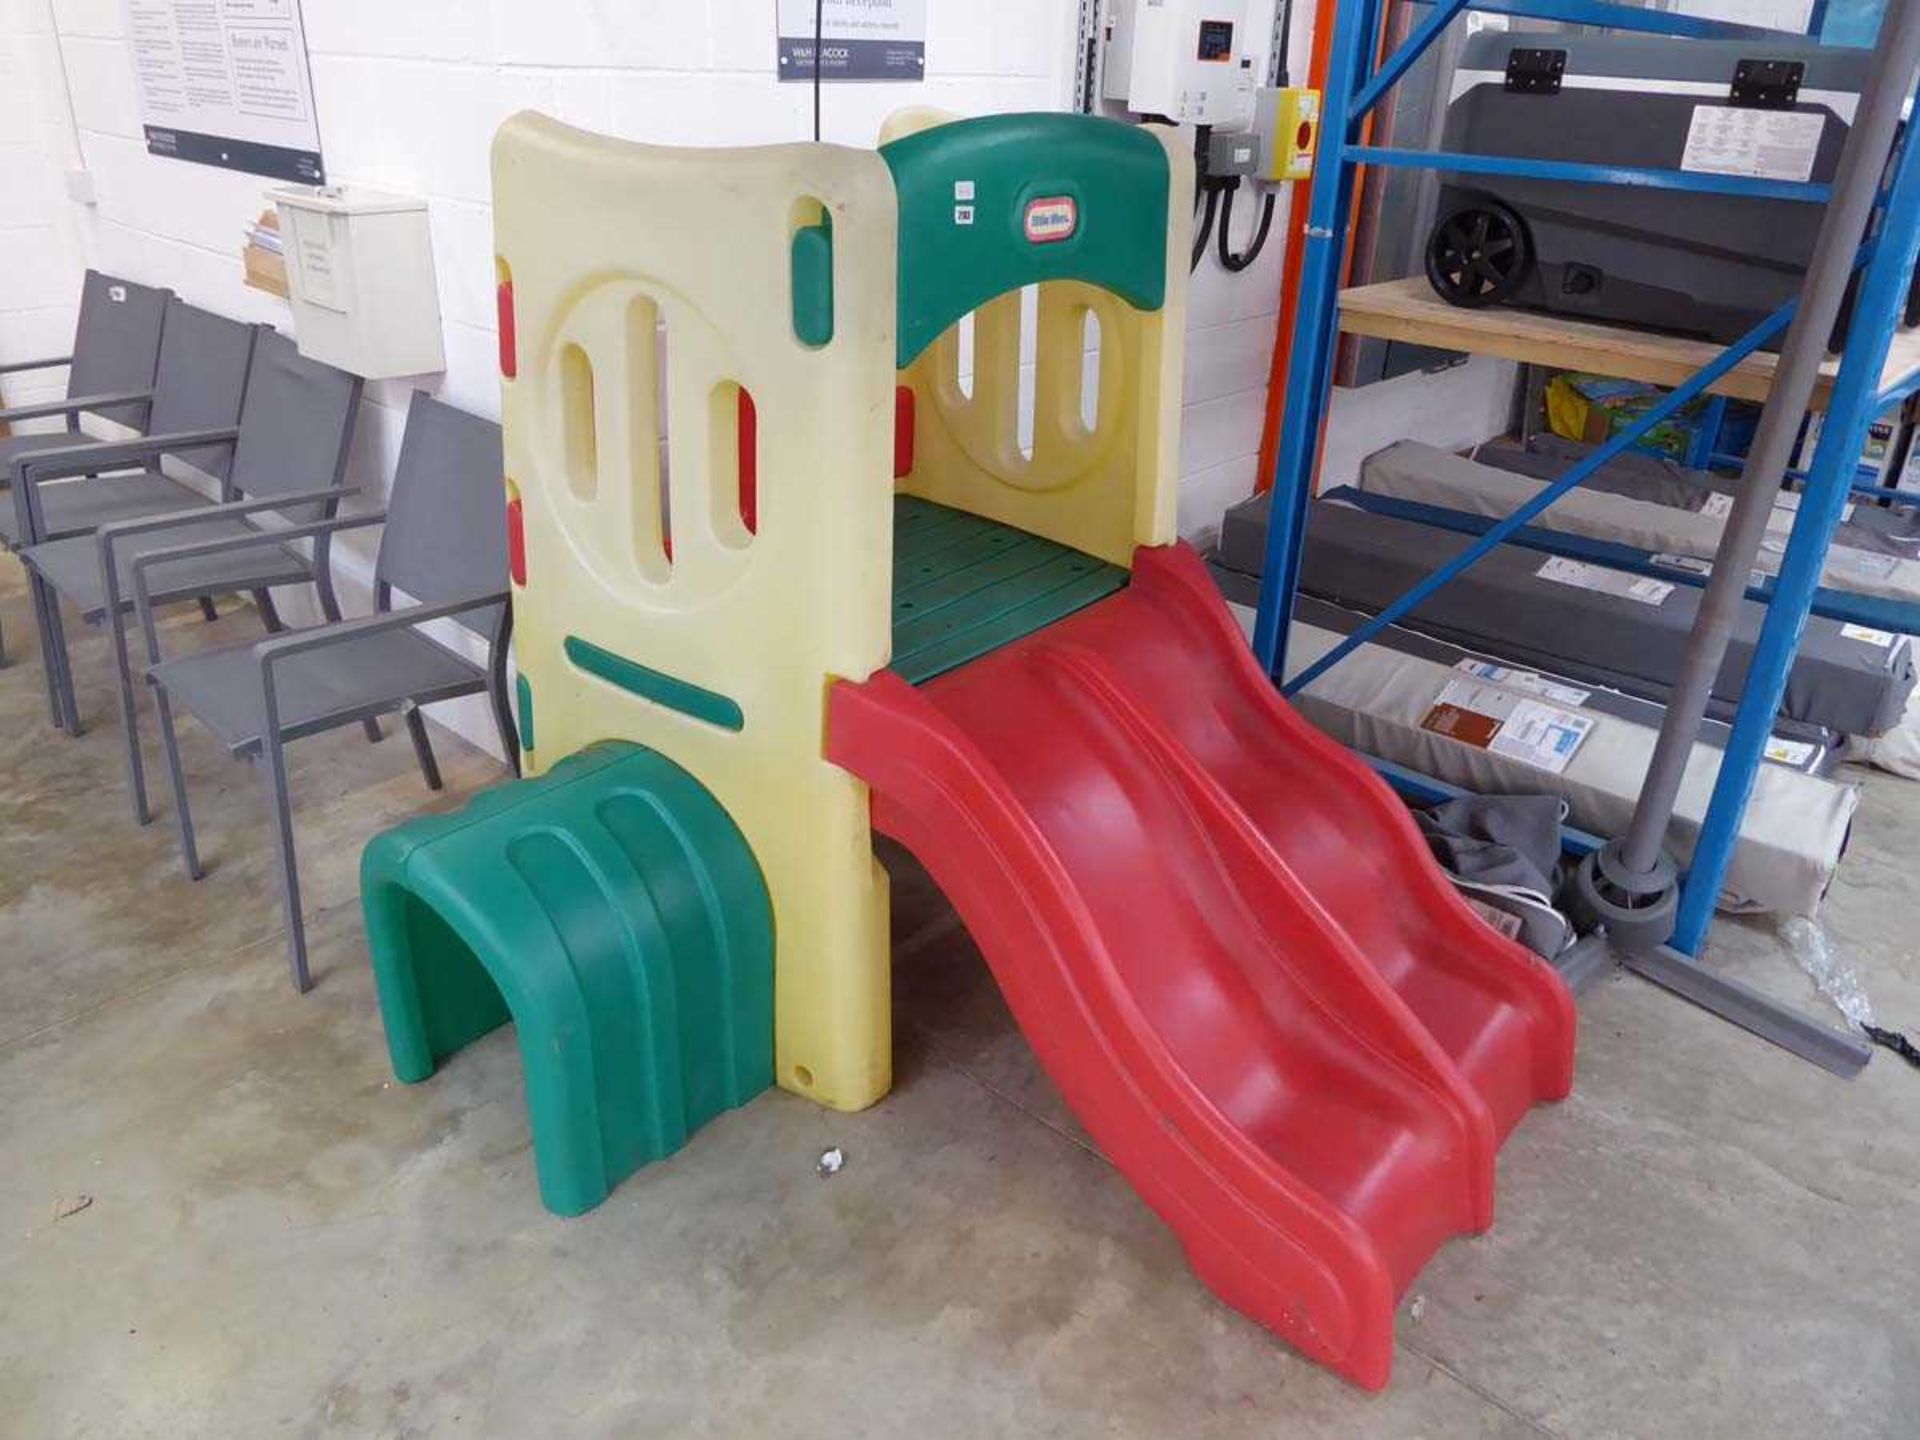 Little Tikes play house